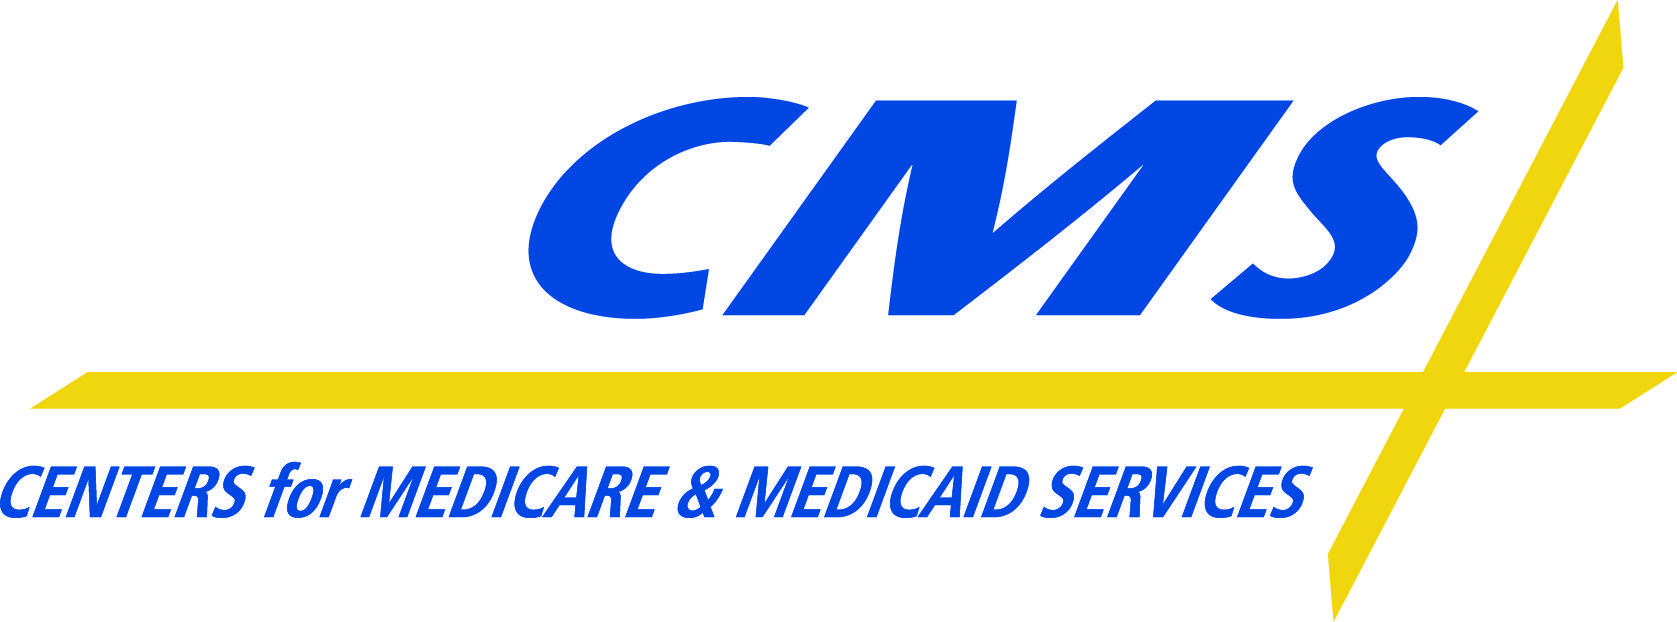 CMS Logo - CMS tries a direct approach to reach unenrolled young adults ...